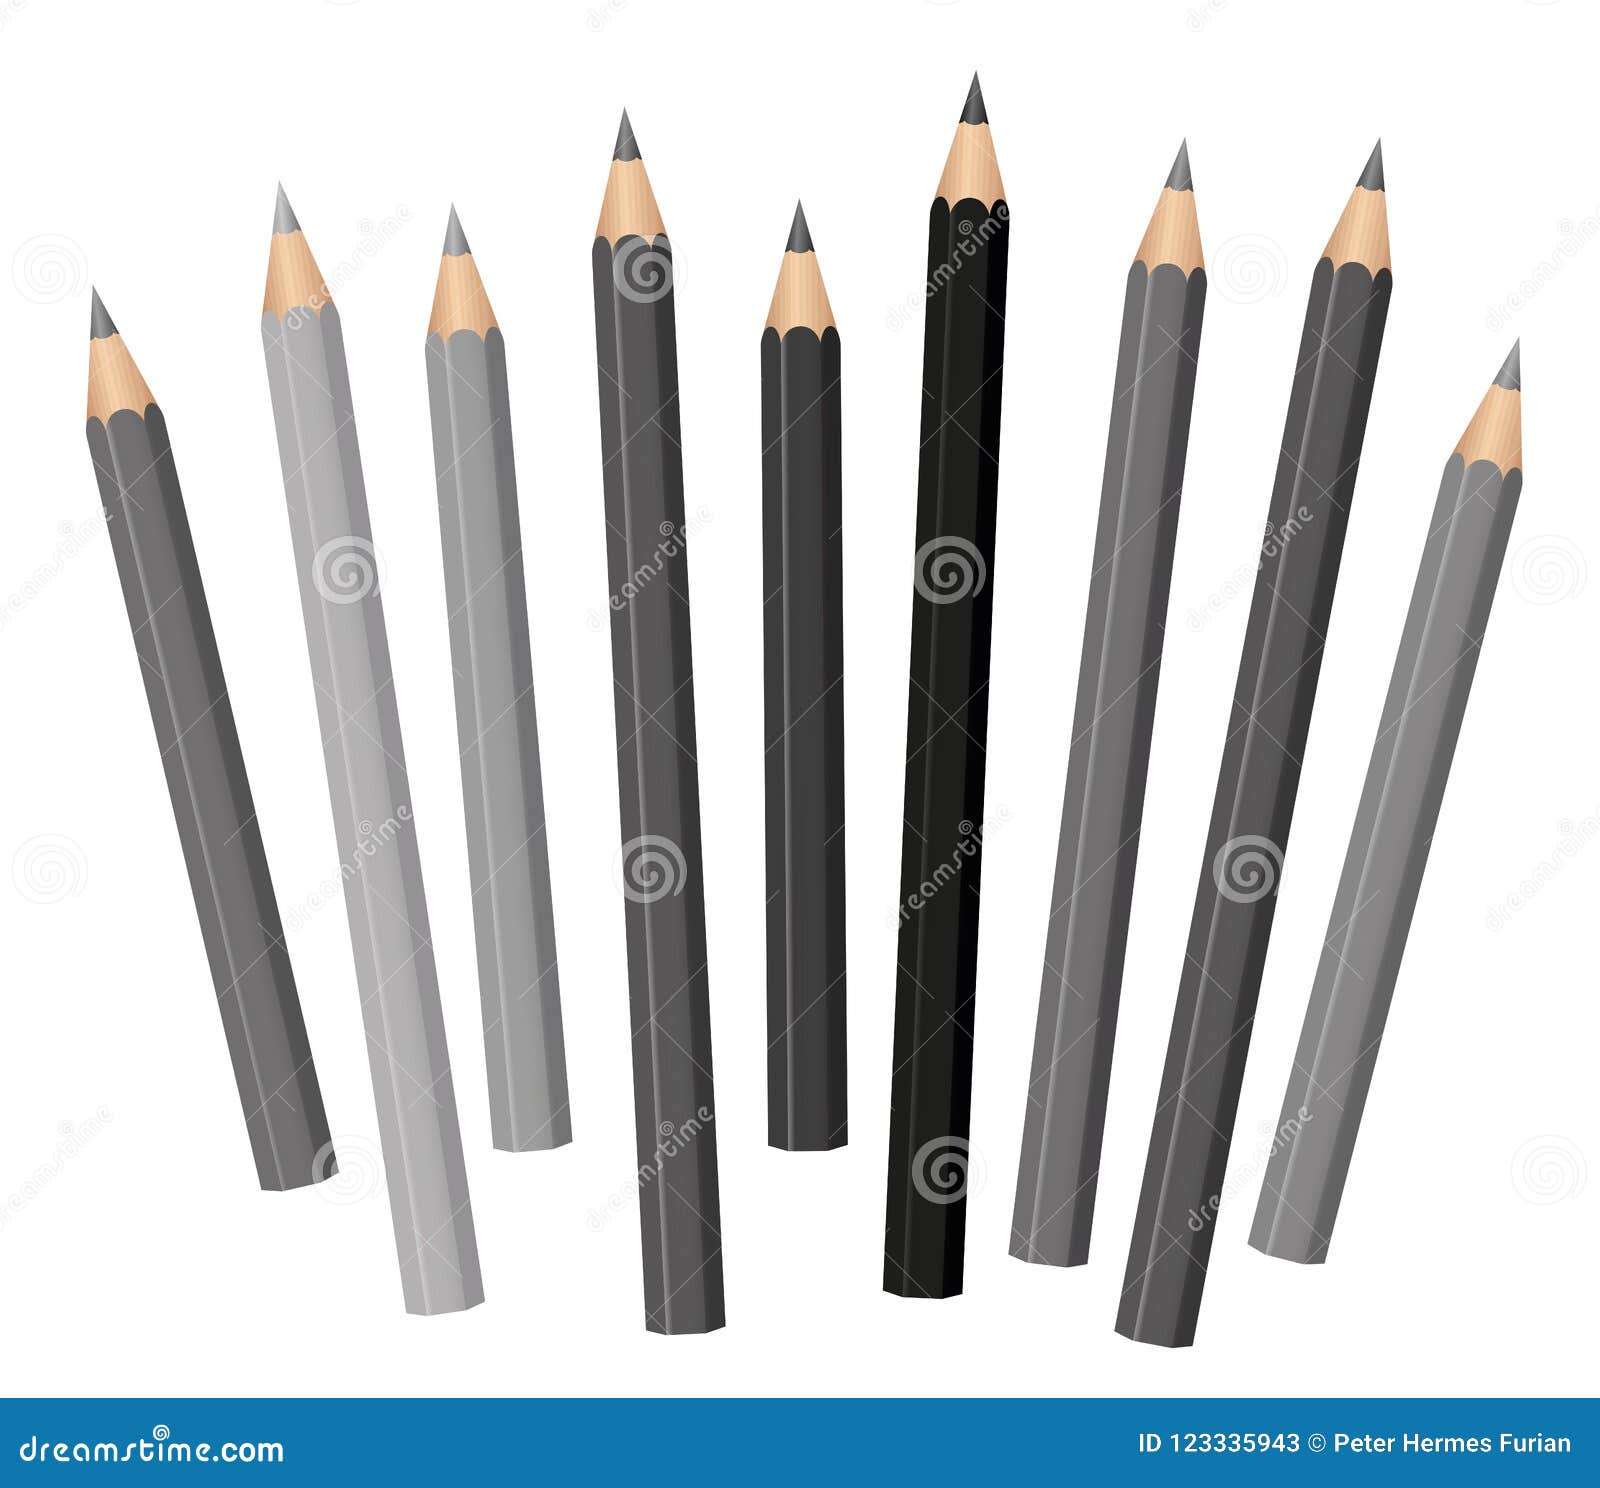 Gray Pencils Shades Tones Set Stock Vector Illustration of collection